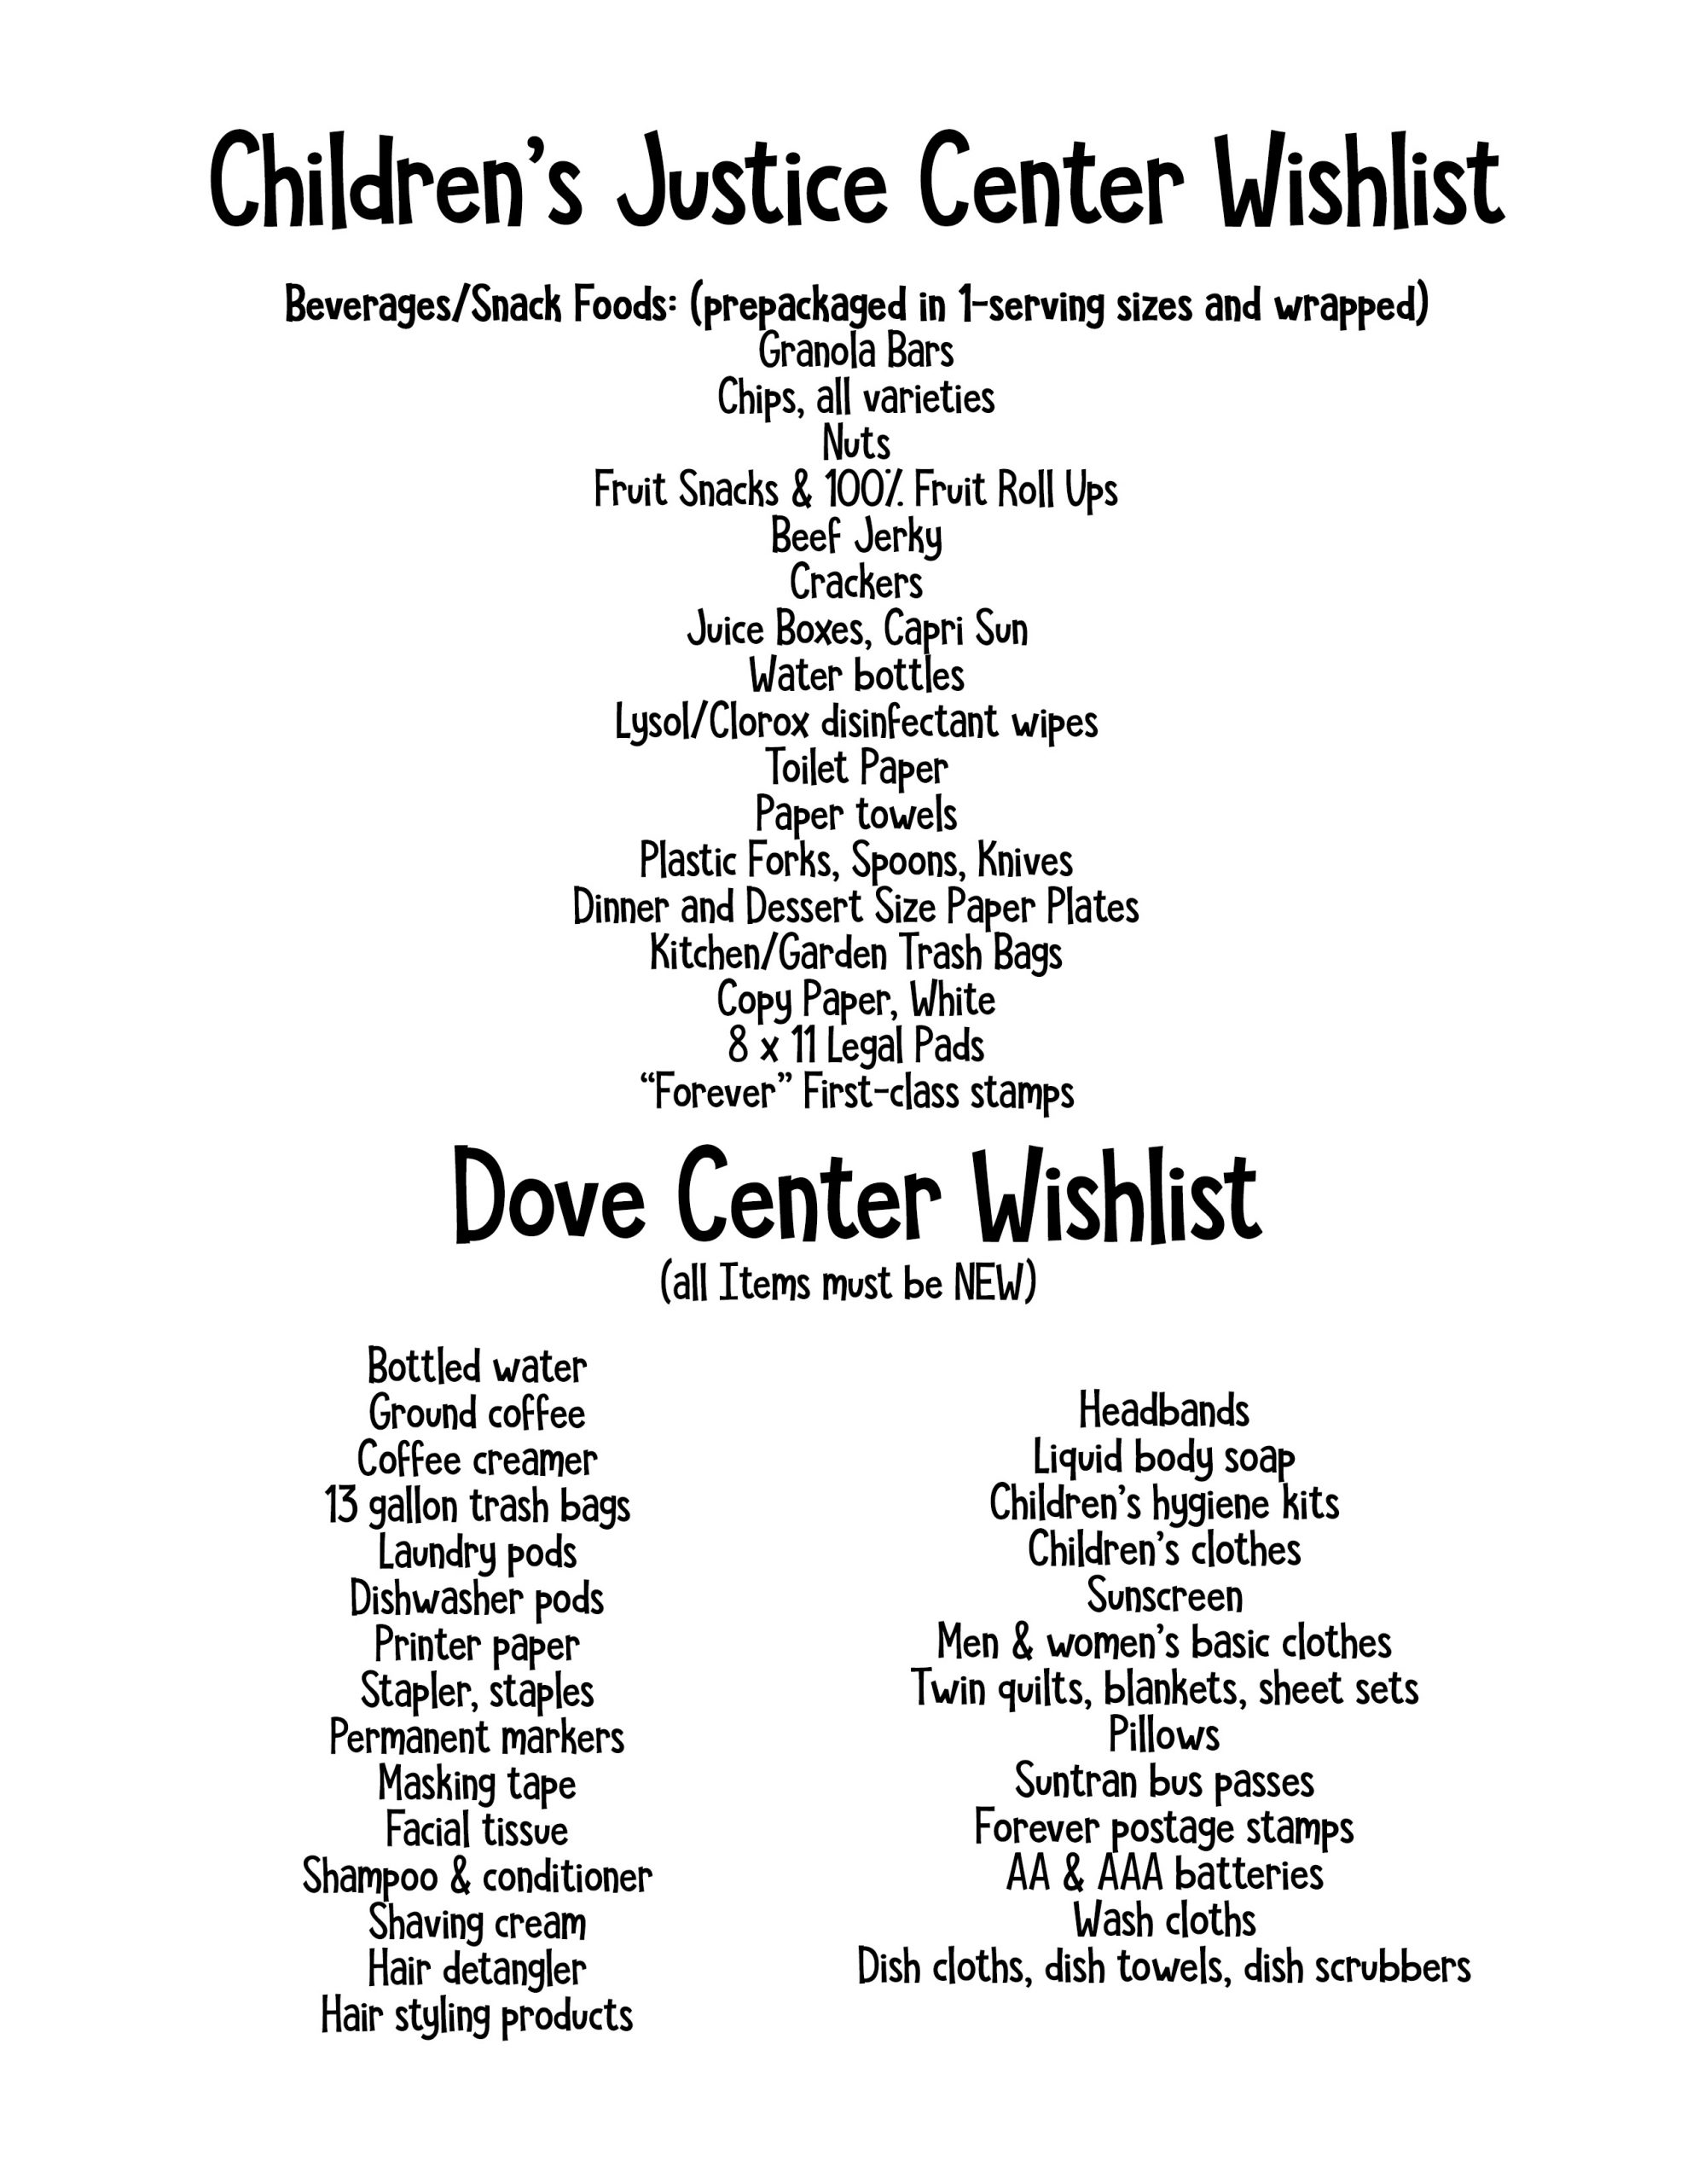 dove center and children's justice center wishlist of items